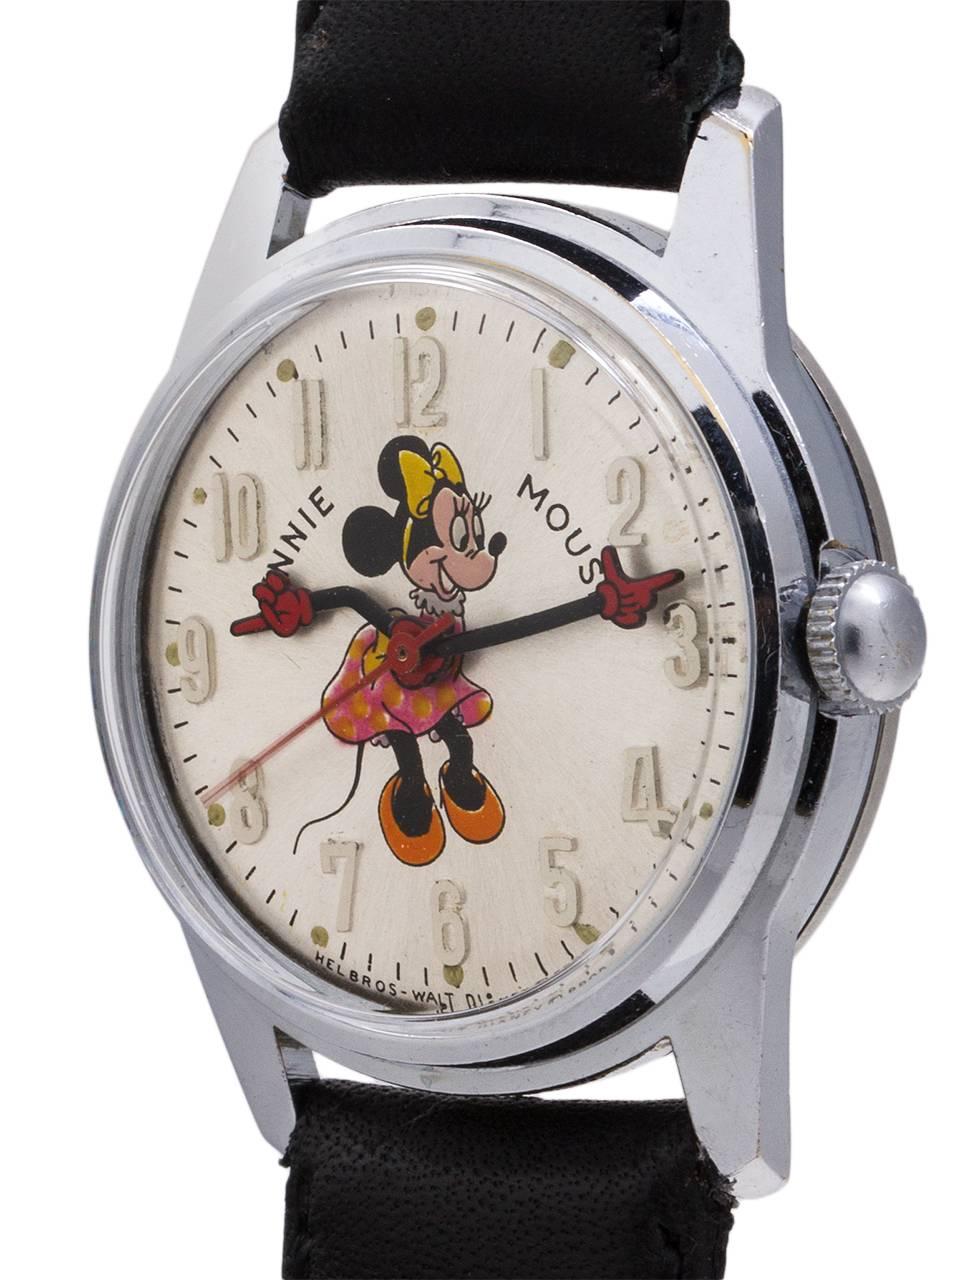 
Vintage medium size Helbros 17 jewel manual wind Minnie Mouse watch circa 1970’s. Featuring 31mm diameter chromium plated case with steel screw down back, with acrylic crystal, and with excellent condition original dial with polychrome depiction of